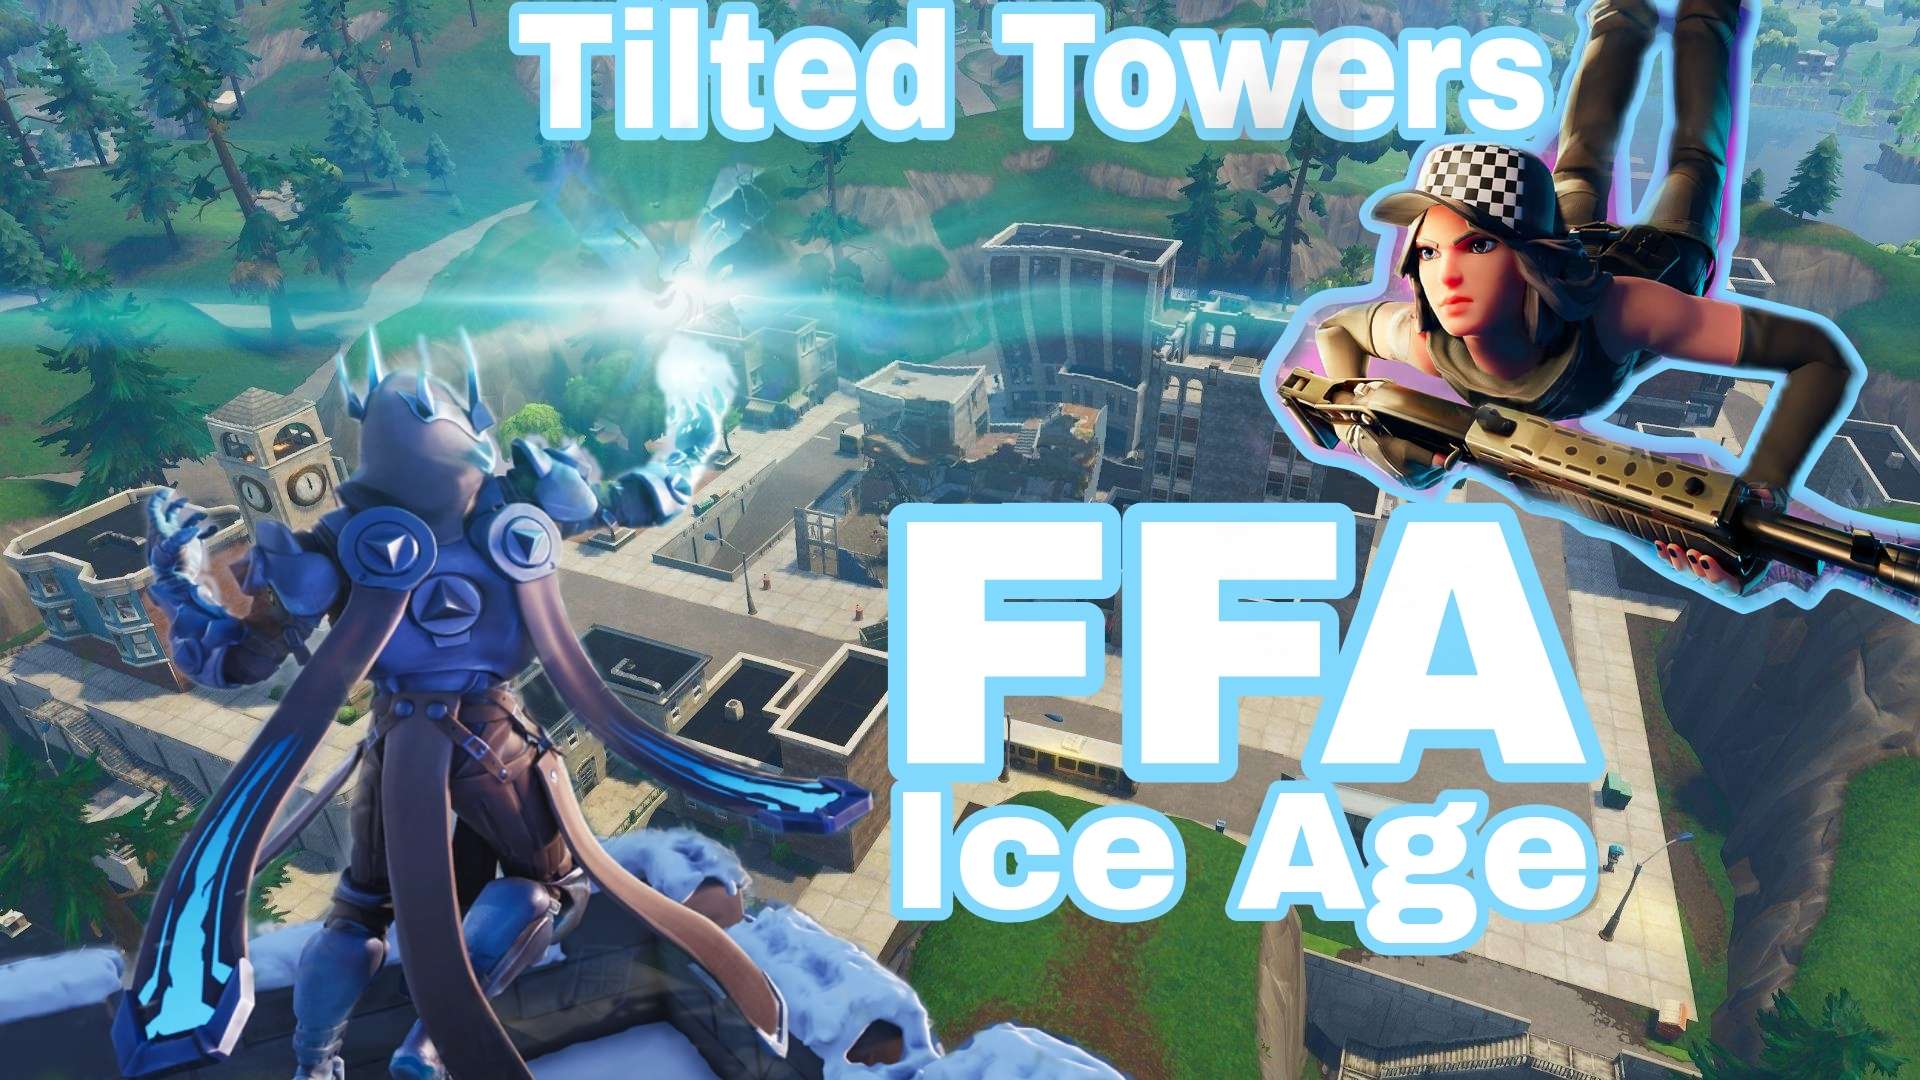 Tilted Towers FFA ICE AGE image 2